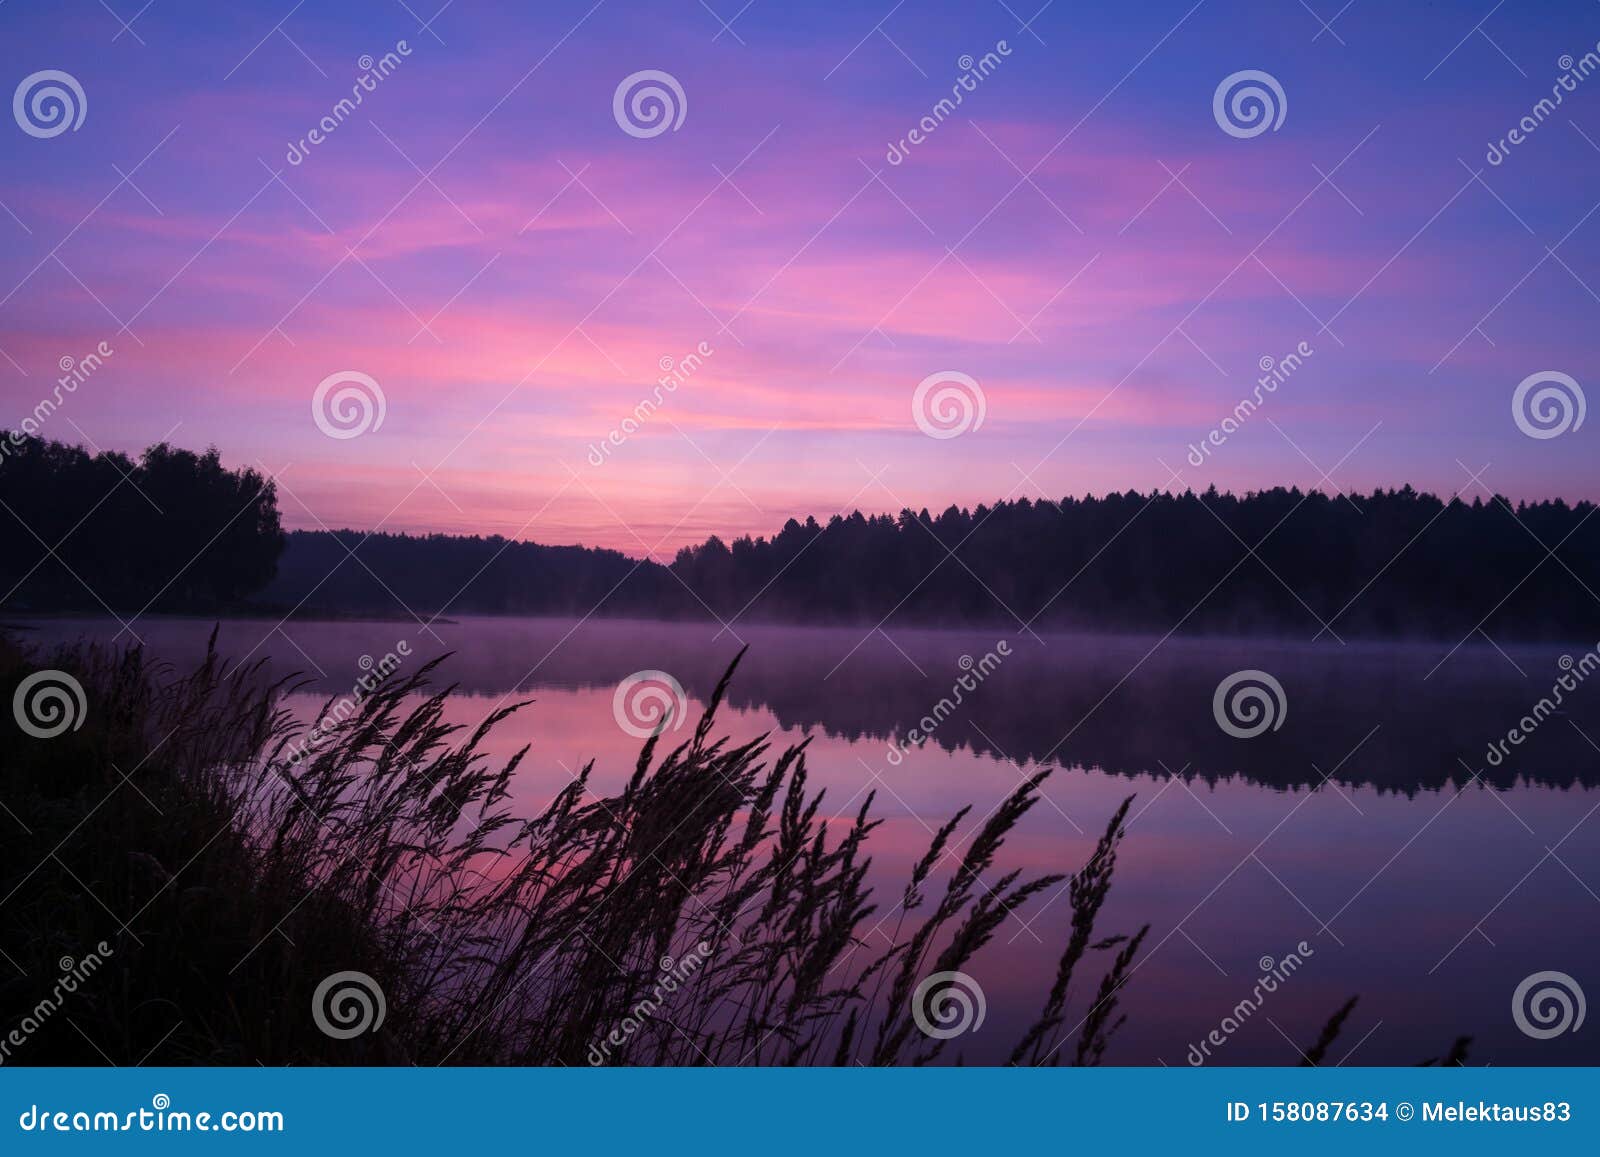 Sunrise Over The Lake In The Forest Stock Photo Image Of Blue